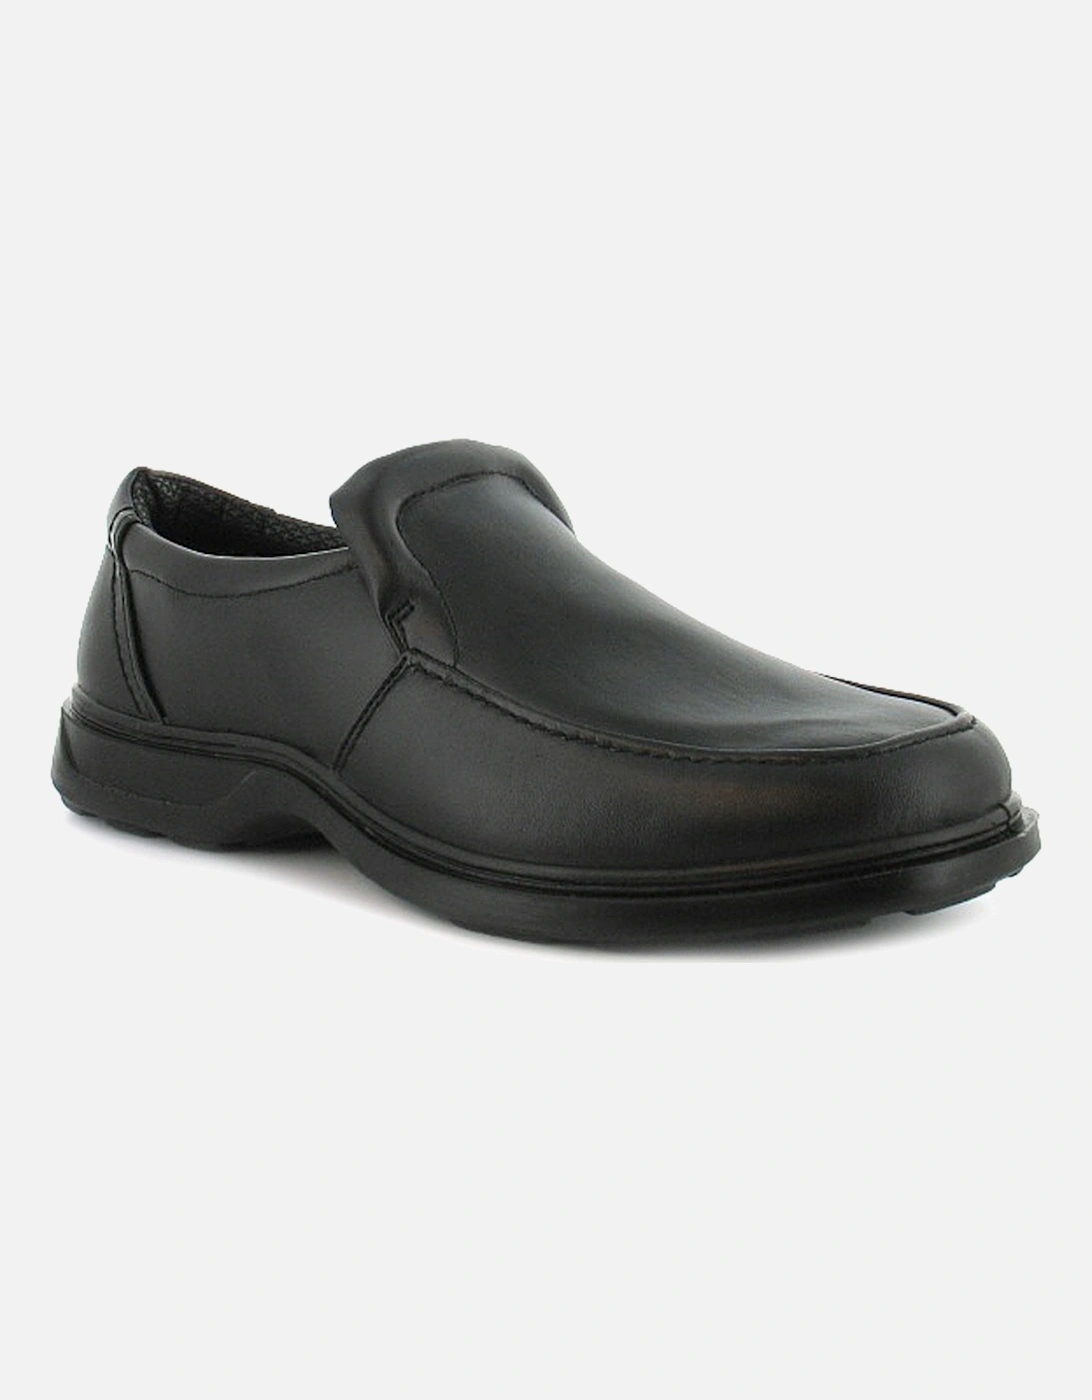 Mens Casual Shoes Wide Robin Slip On black UK Size, 6 of 5